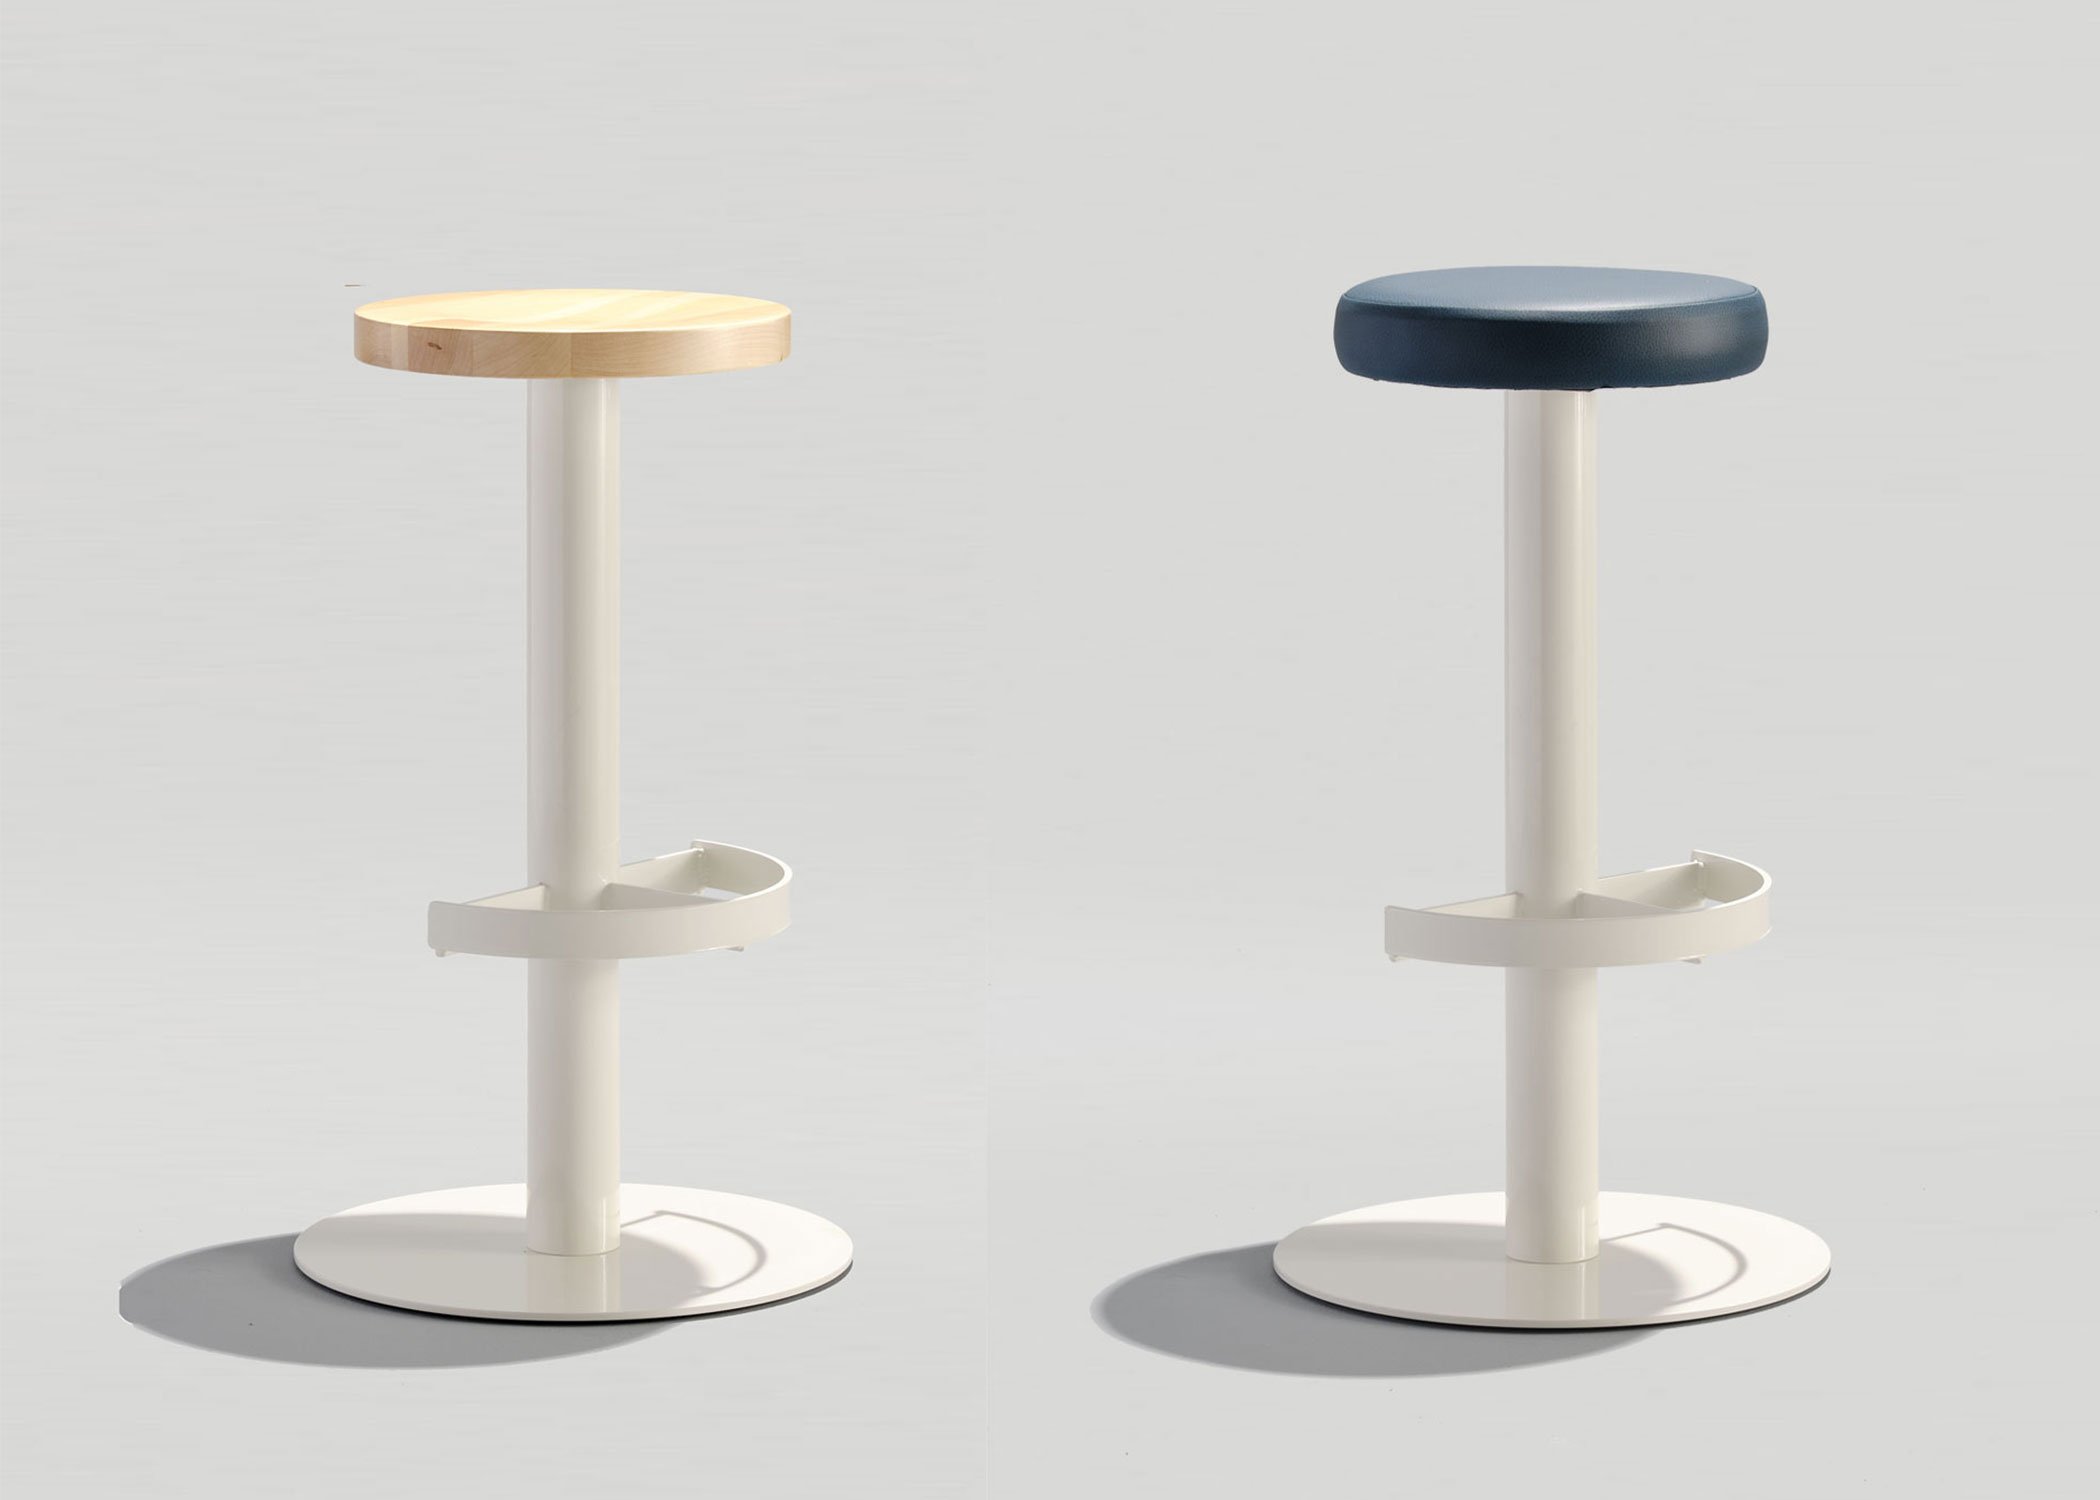 Two Freestanding Sally Stools in white powder coats. Left stool has a wood seat. Right stool's seat is upholstered.